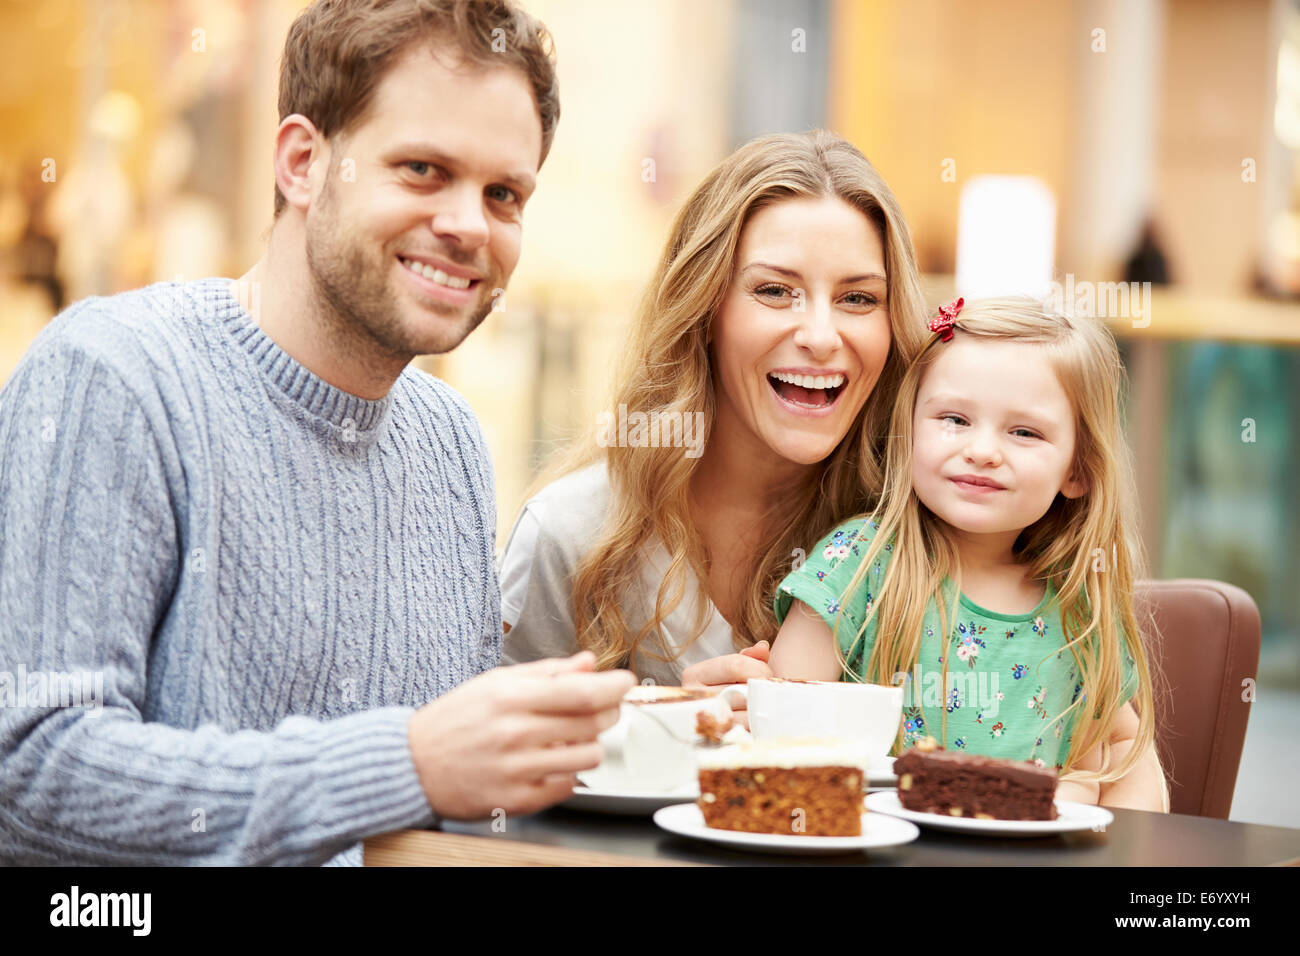 Family Enjoying Snack In Café Together Stock Photo